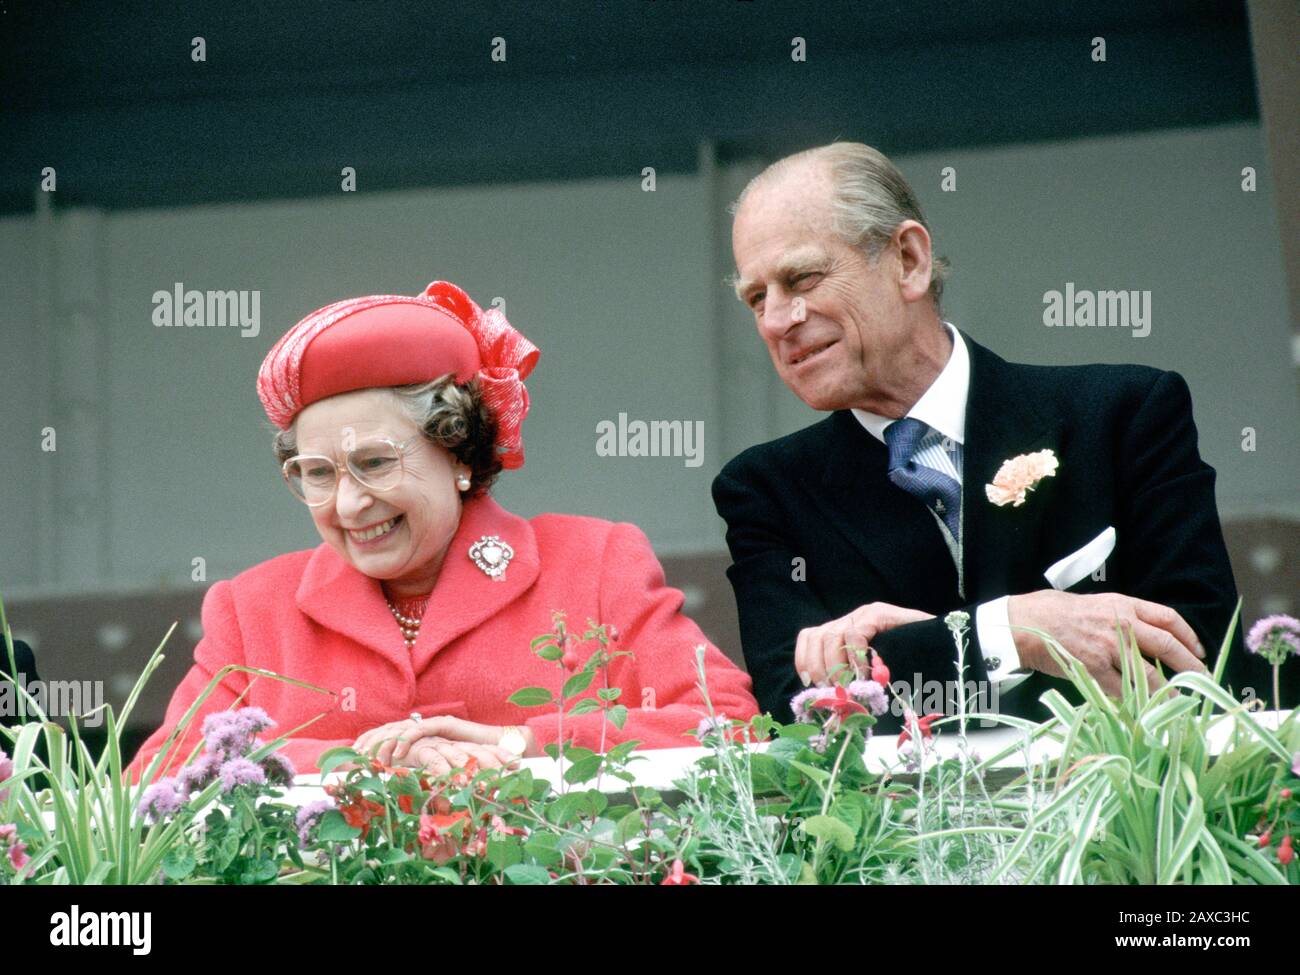 HM Queen Elizabeth II and HRH Prince Philip at the Epsom Derby, England June 1989 Stock Photo